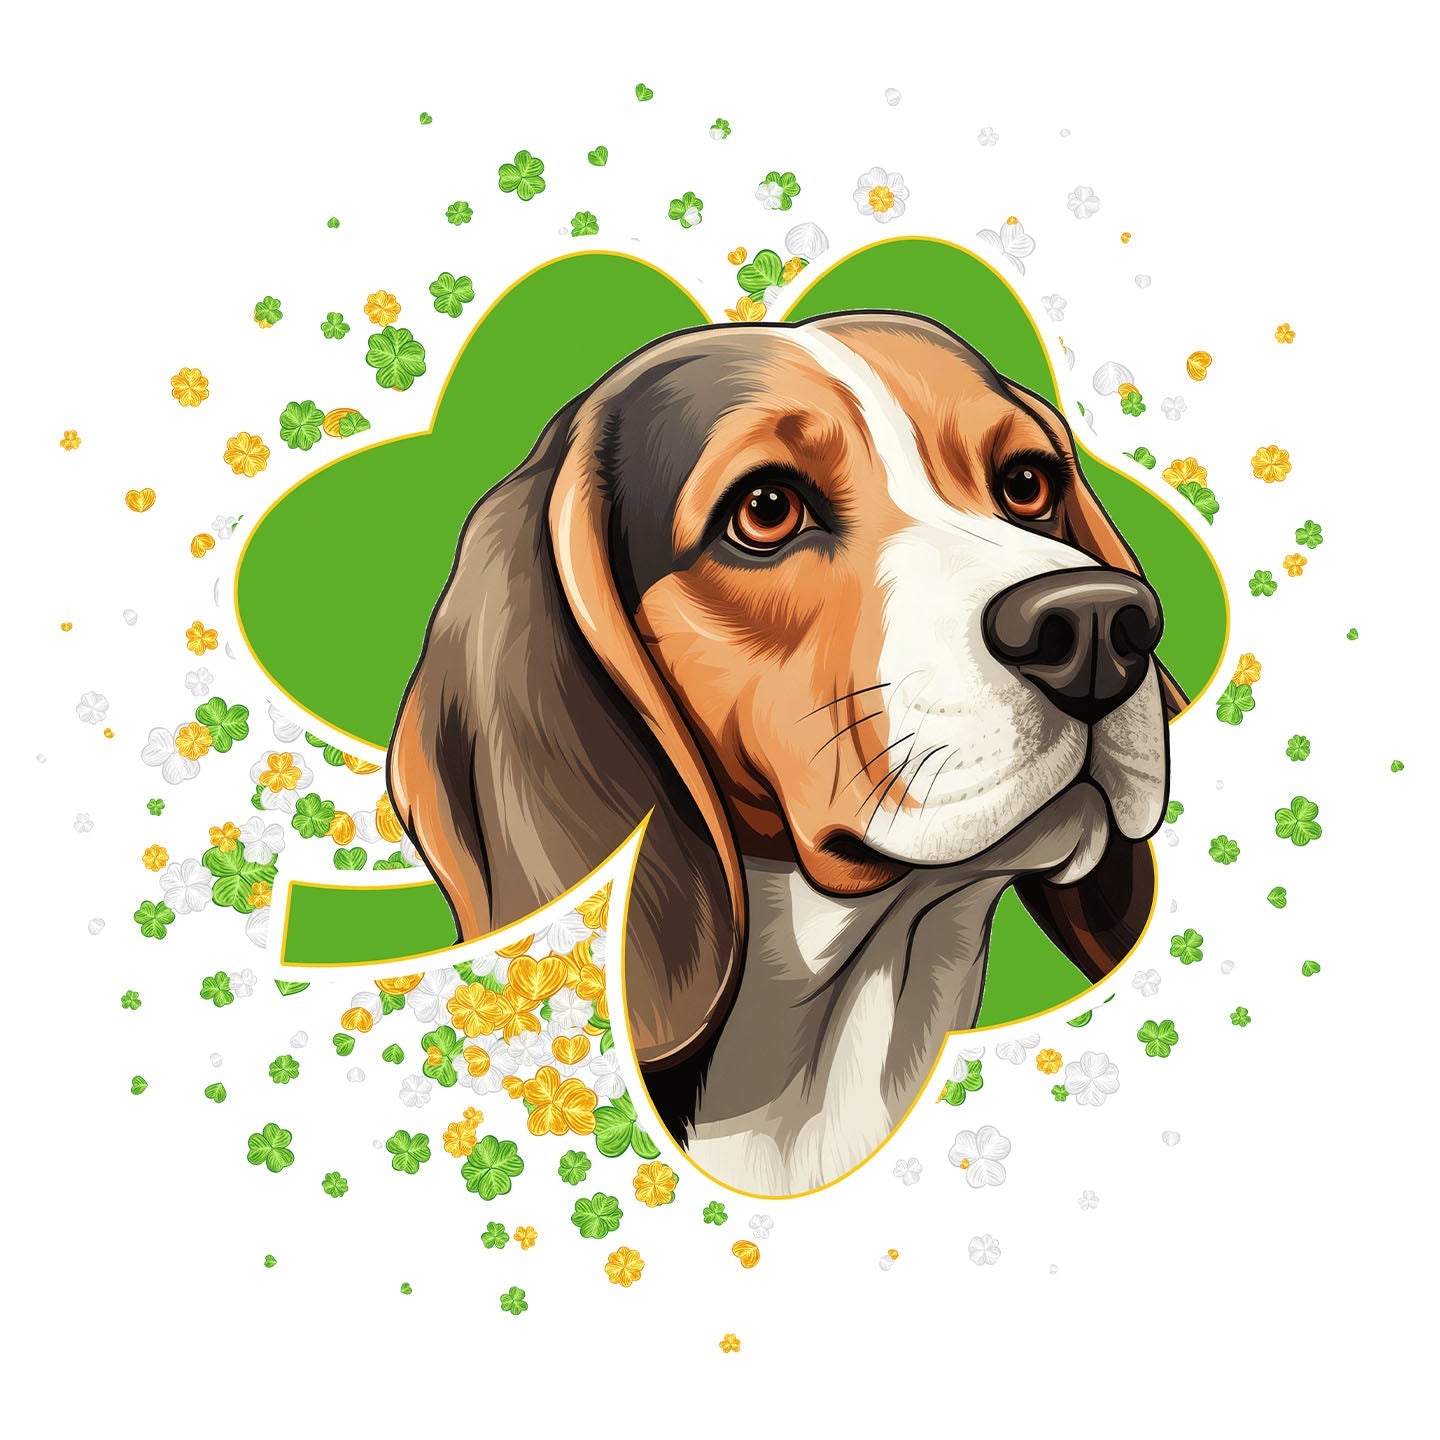 Big Clover St. Patrick's Day Beagle - Women's Fitted T-Shirt